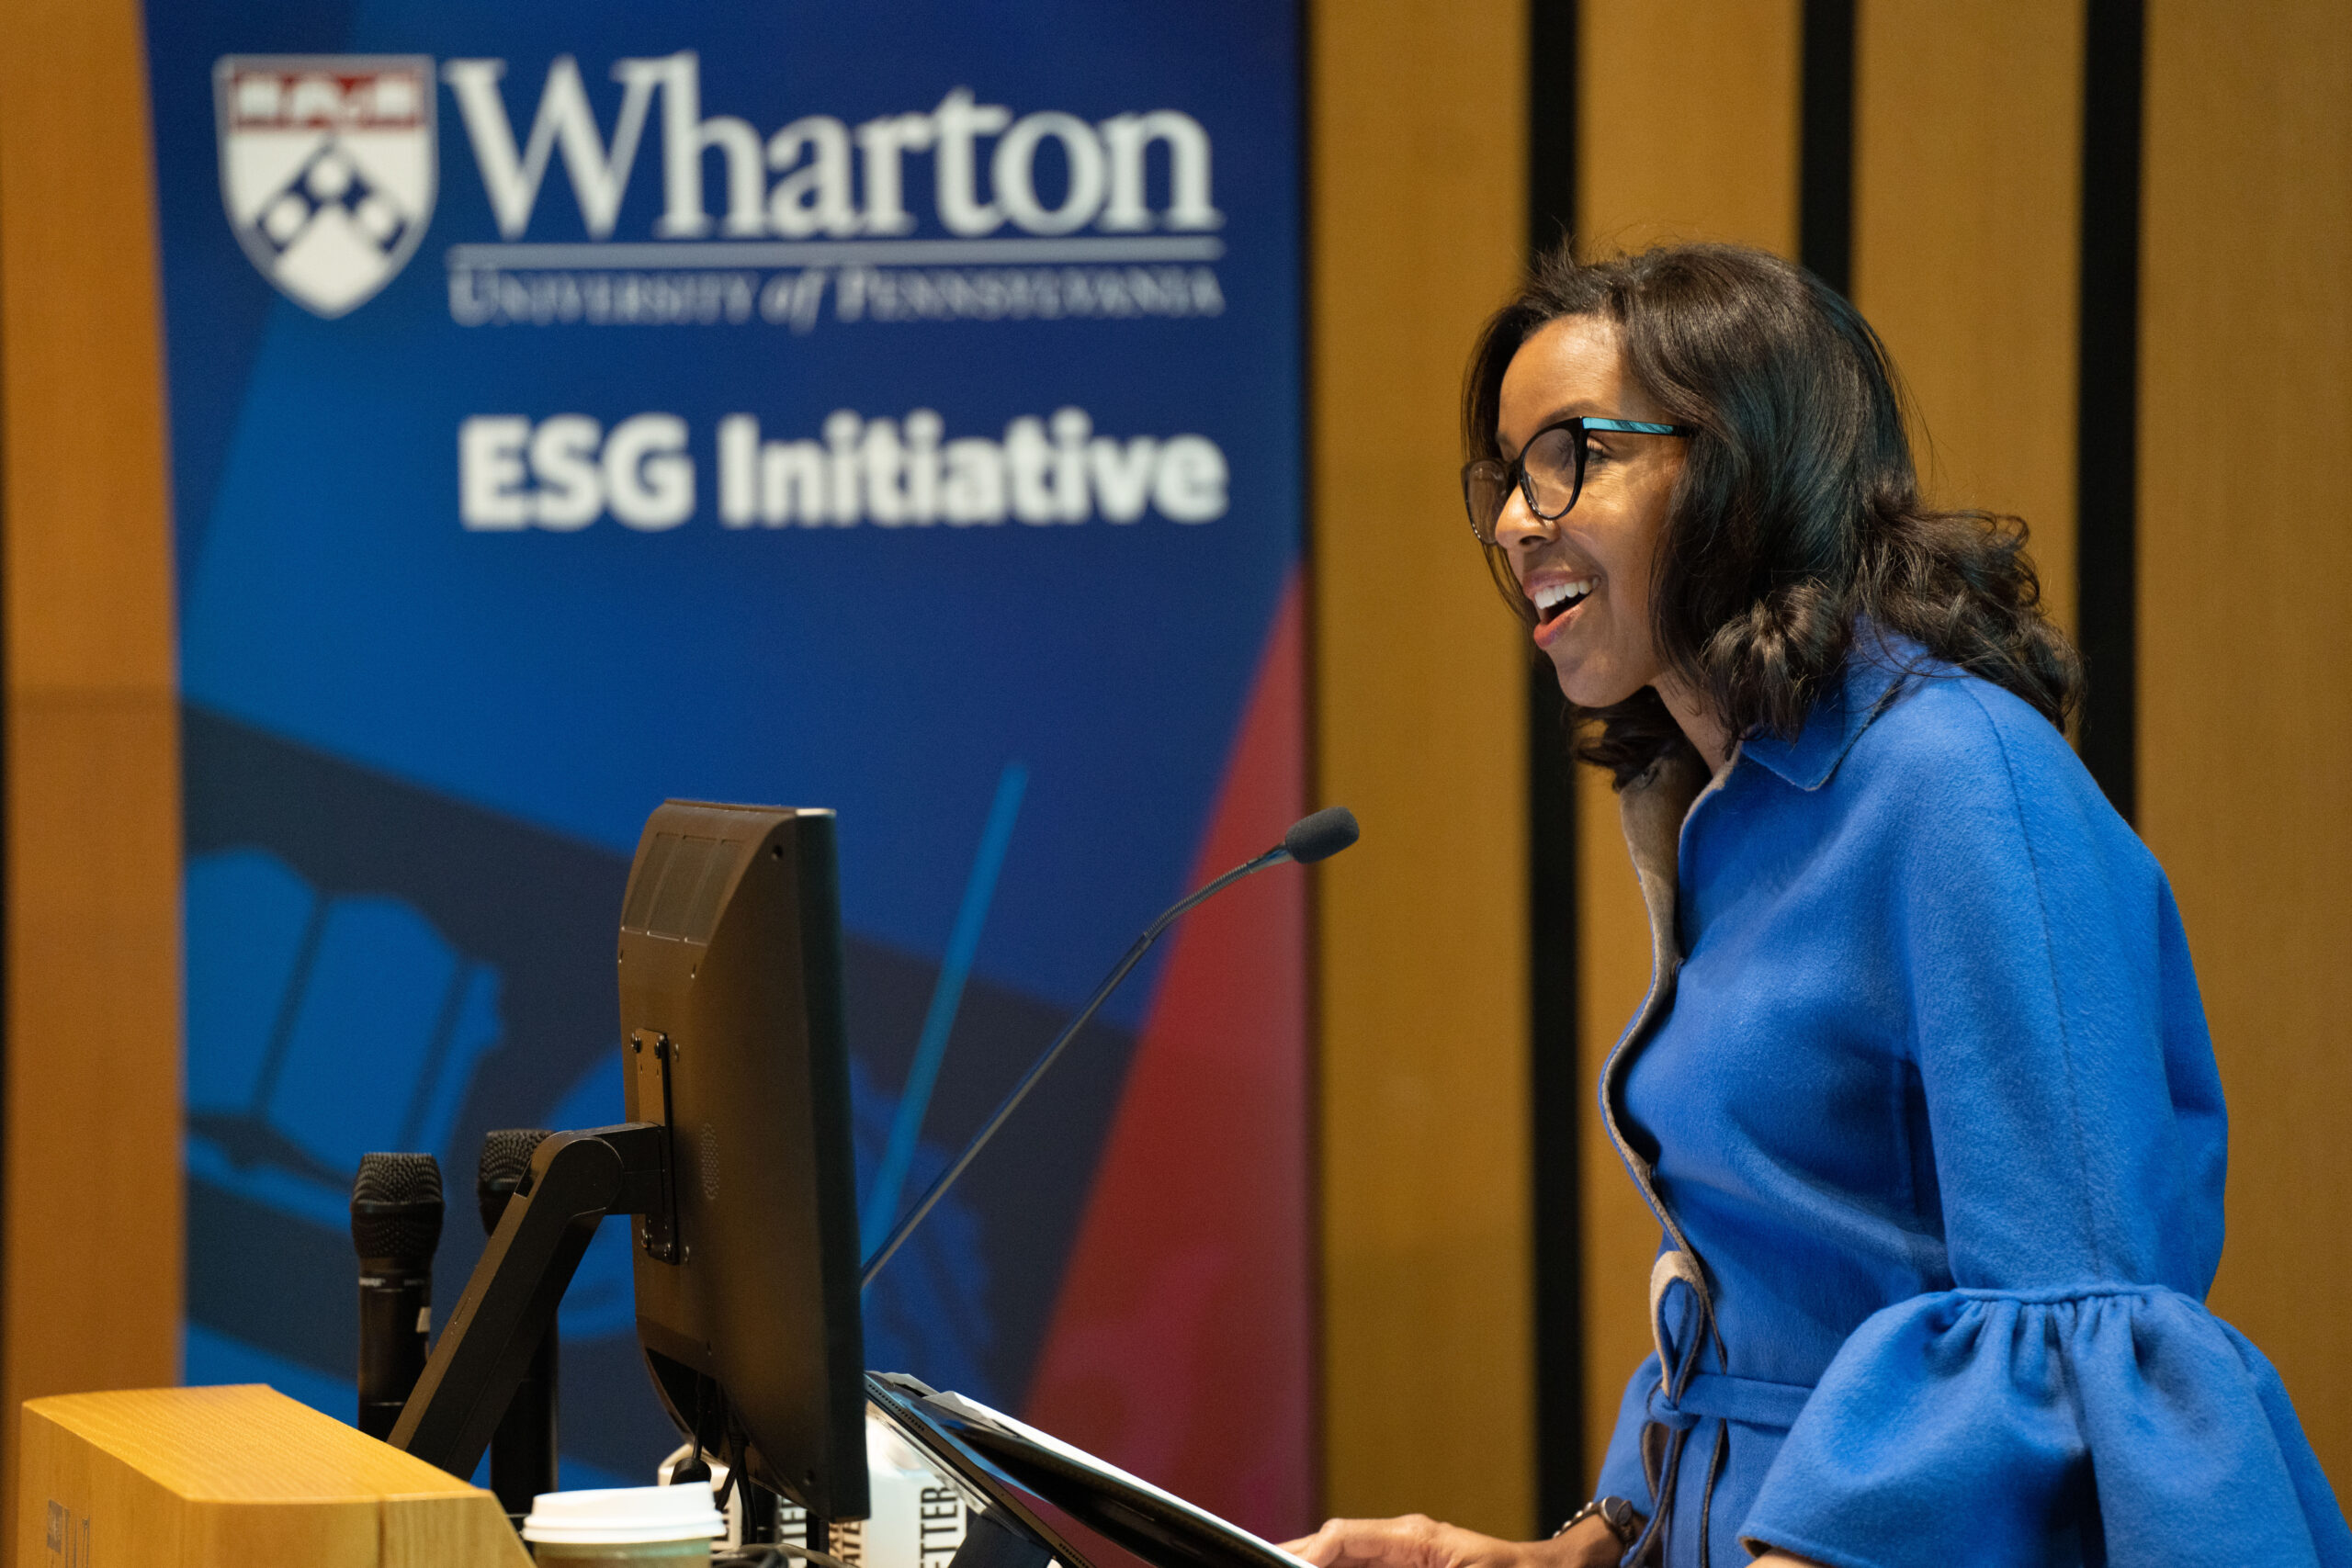 Dean James in a blue blouse smiling and speaking at a podium with a banner in the background that says "Wharton ESG Initiative"